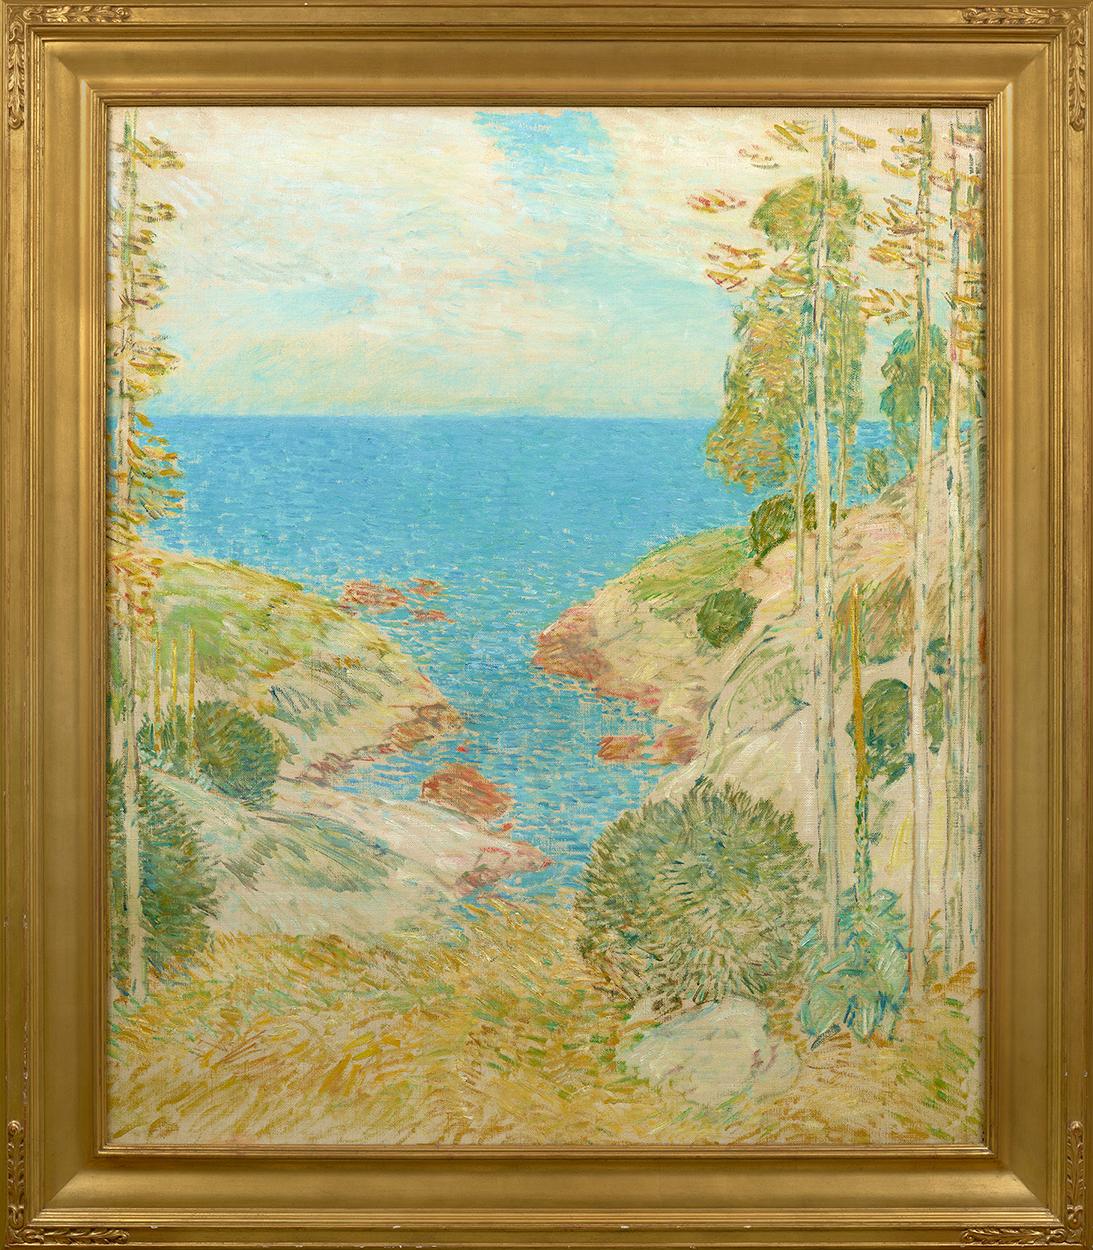 Marine View, Isles of Shoals - Painting by Childe Hassam